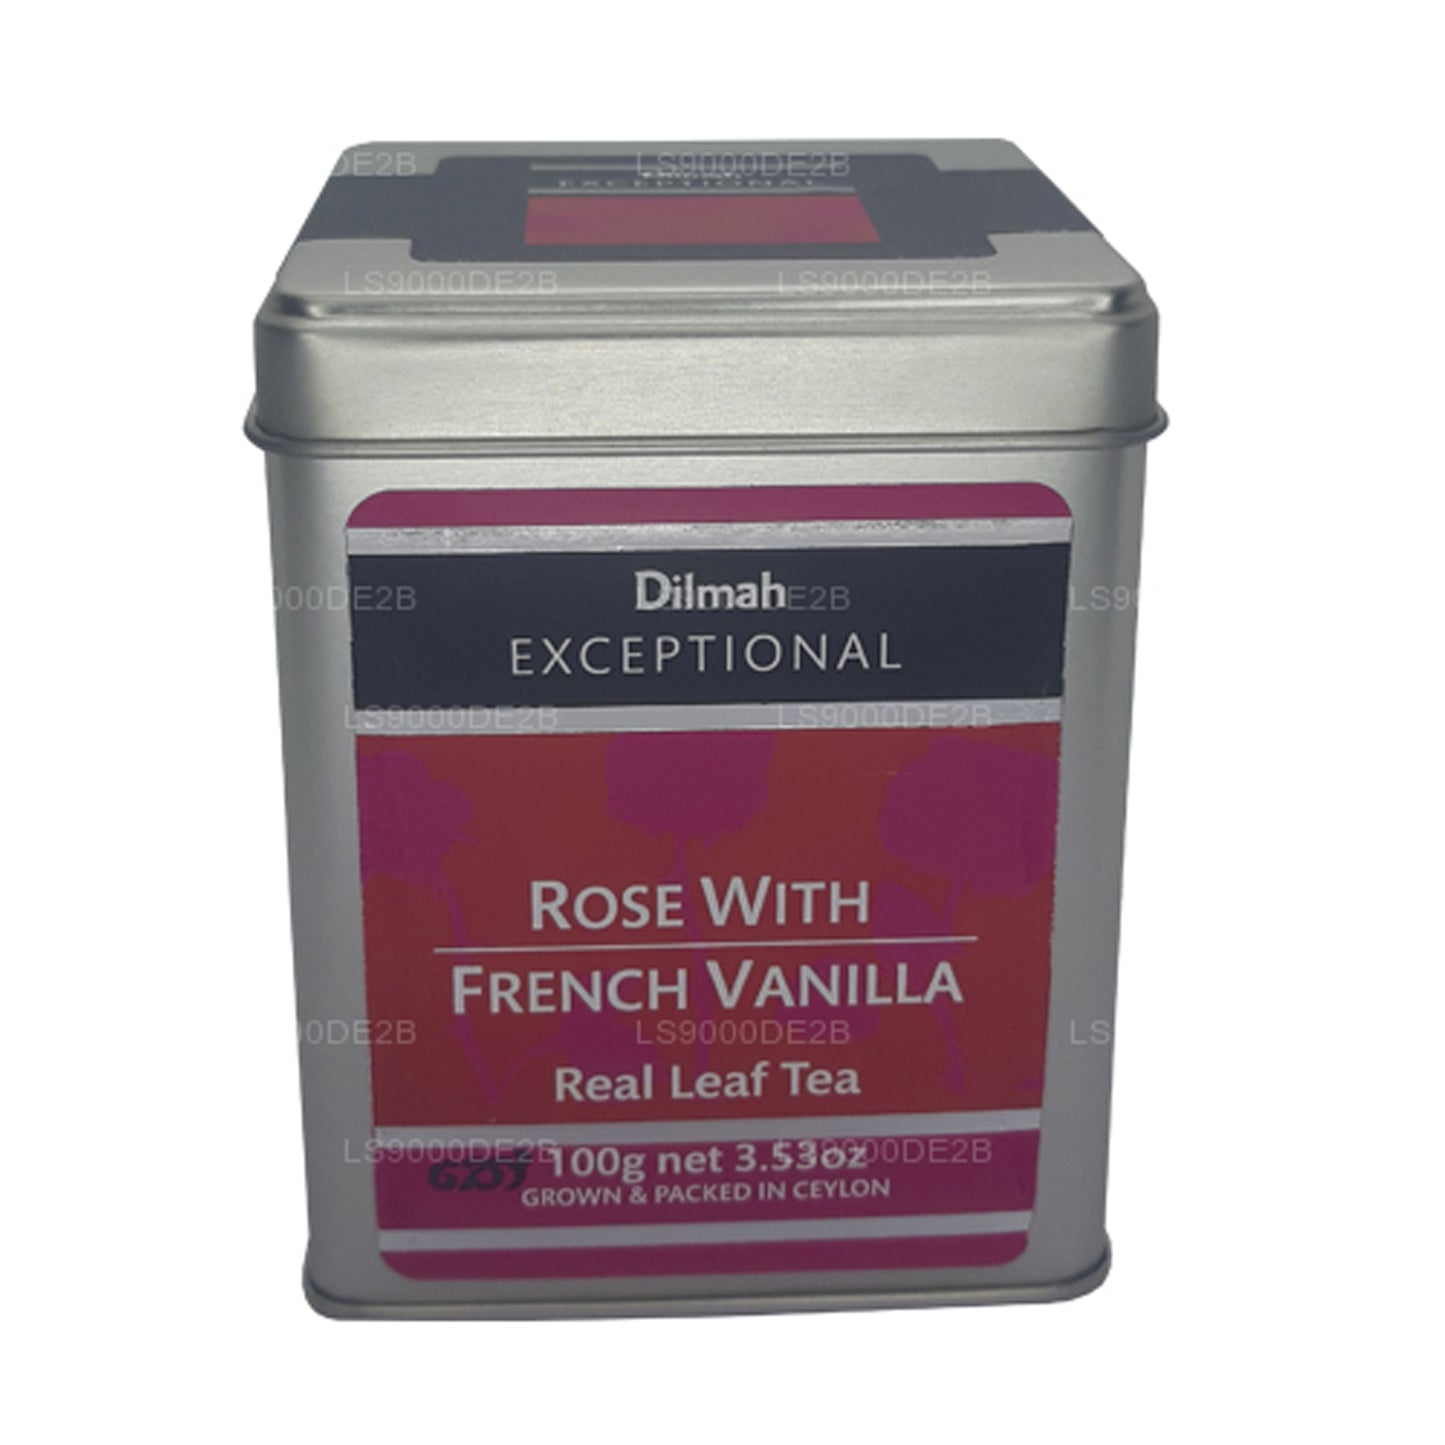 Dilmah Exceptional Rose with French Vanilla Leaf Tea (100g)